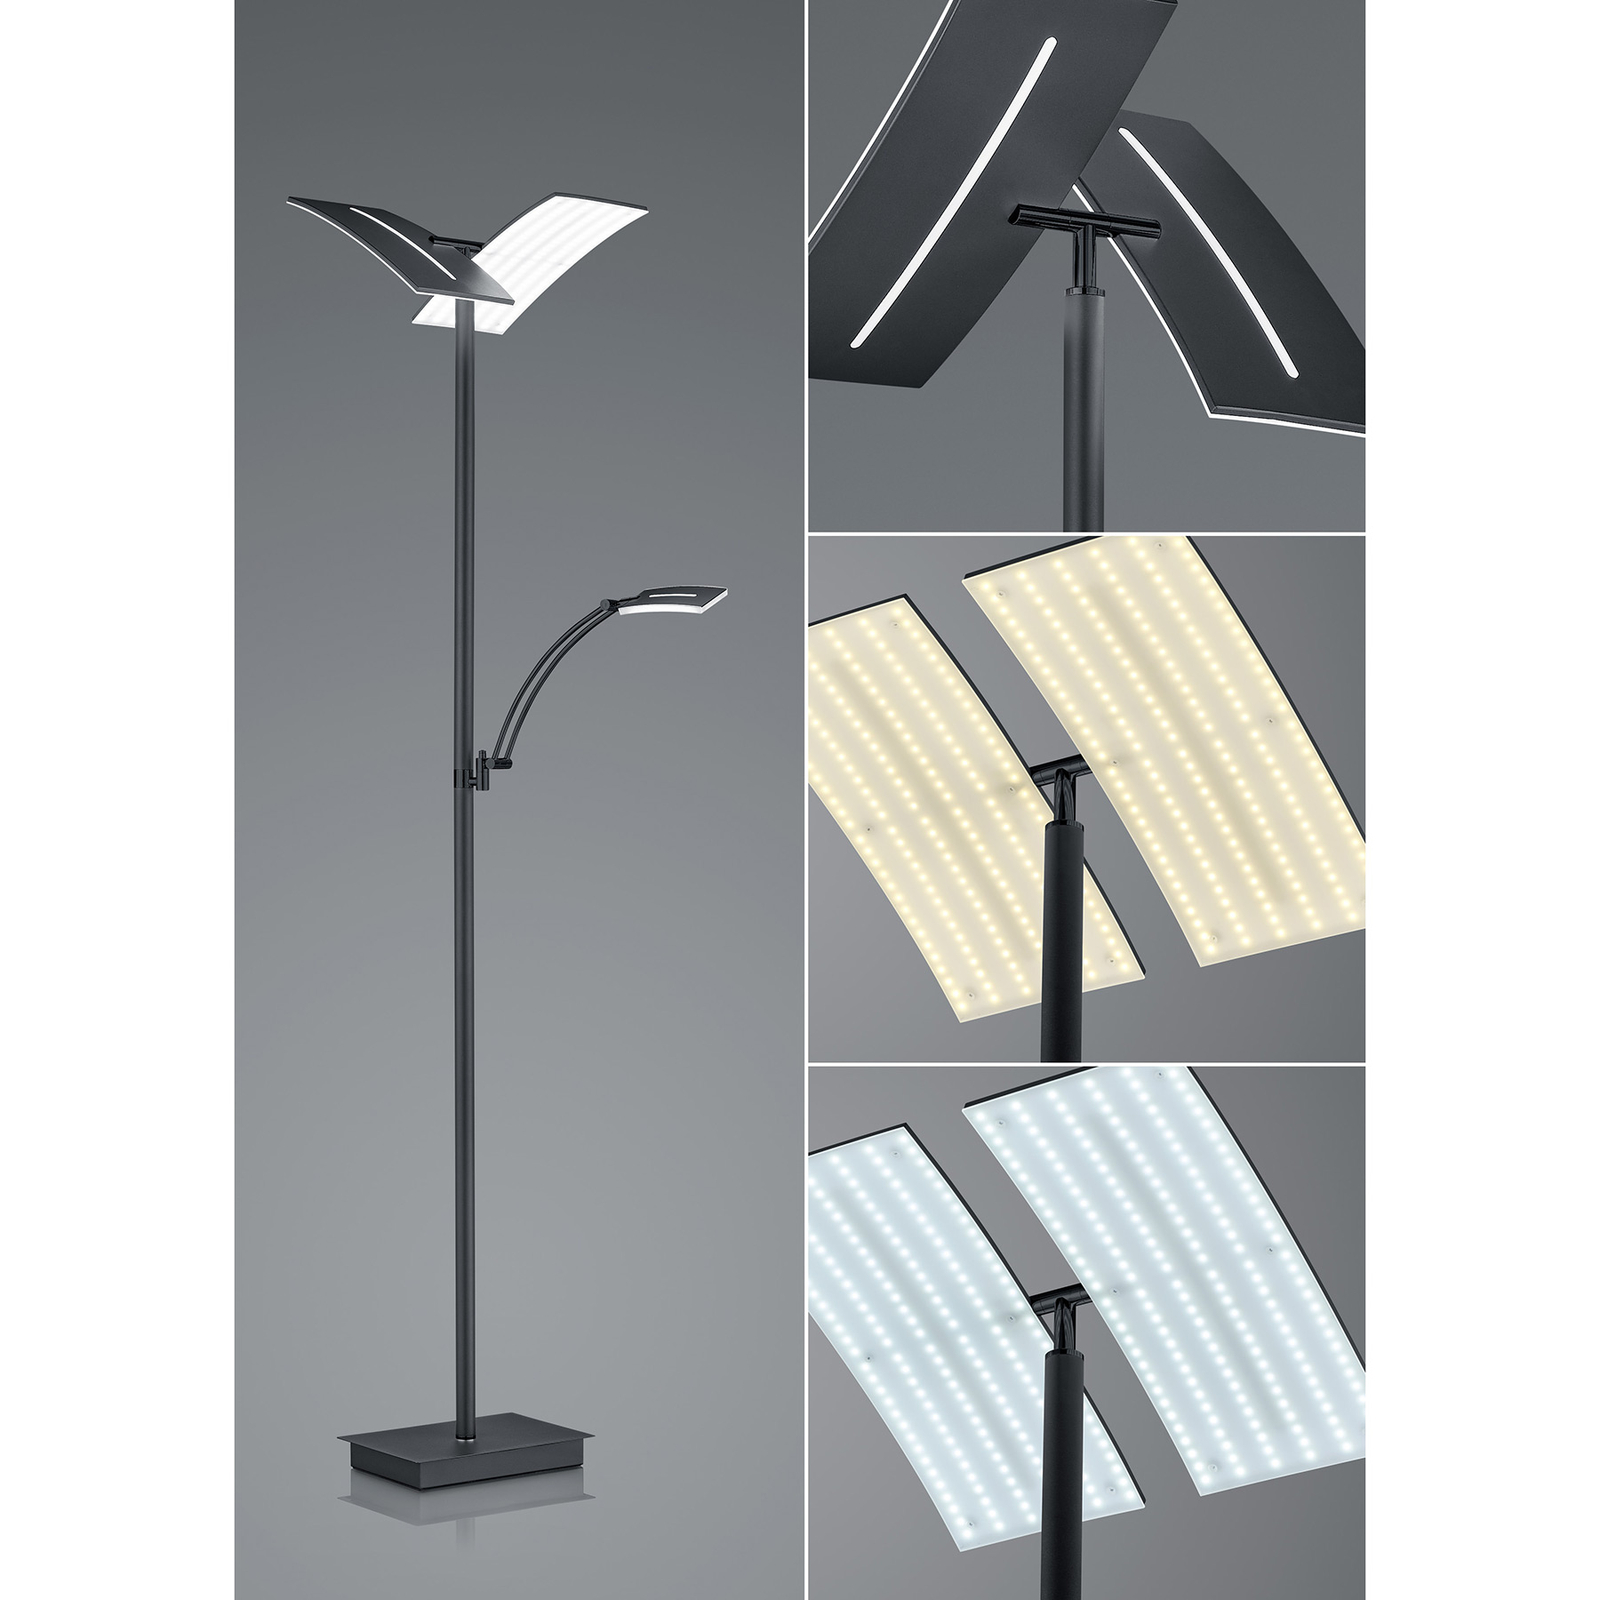 Dual LED floor lamp with a reading light, black